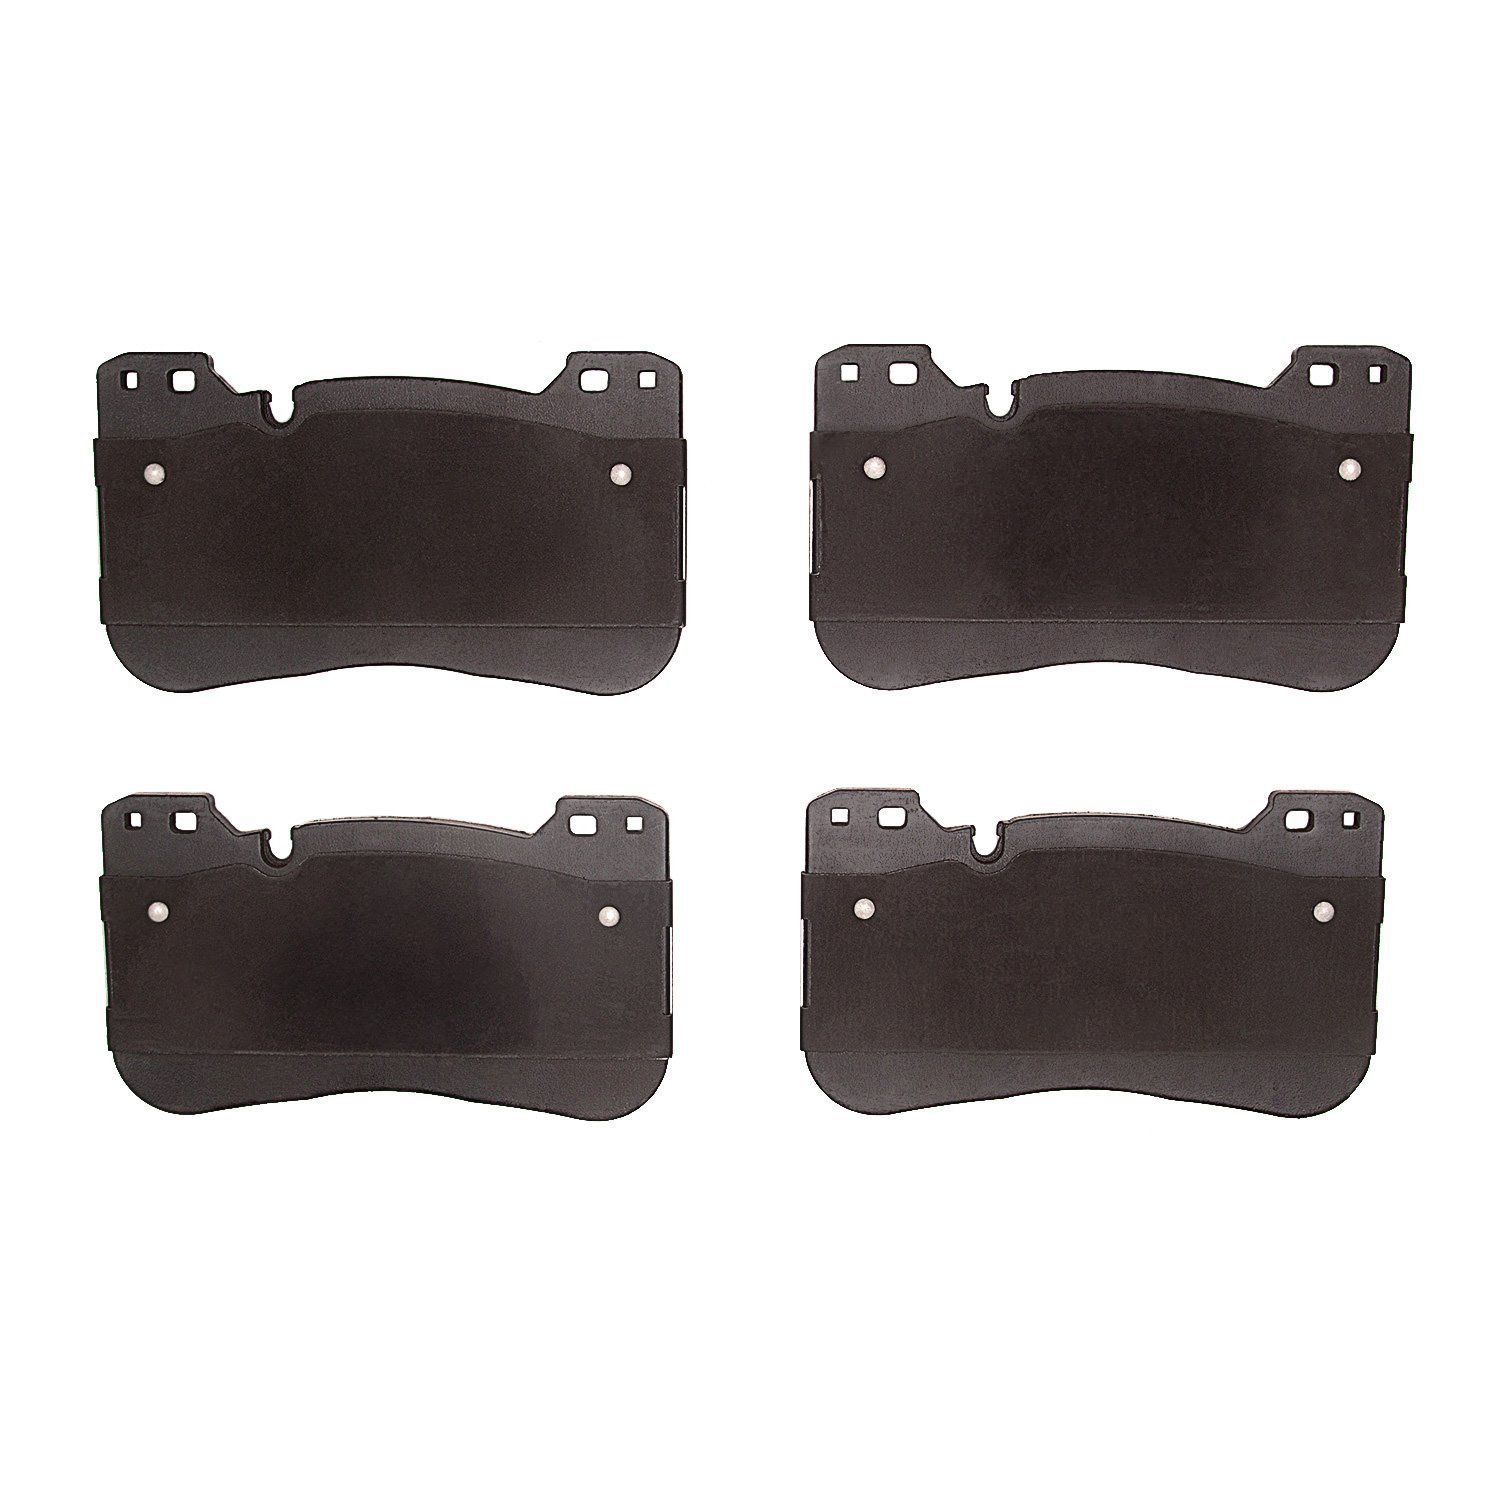 1310-2155-00 3000-Series Ceramic Brake Pads, Fits Select BMW, Position: Front